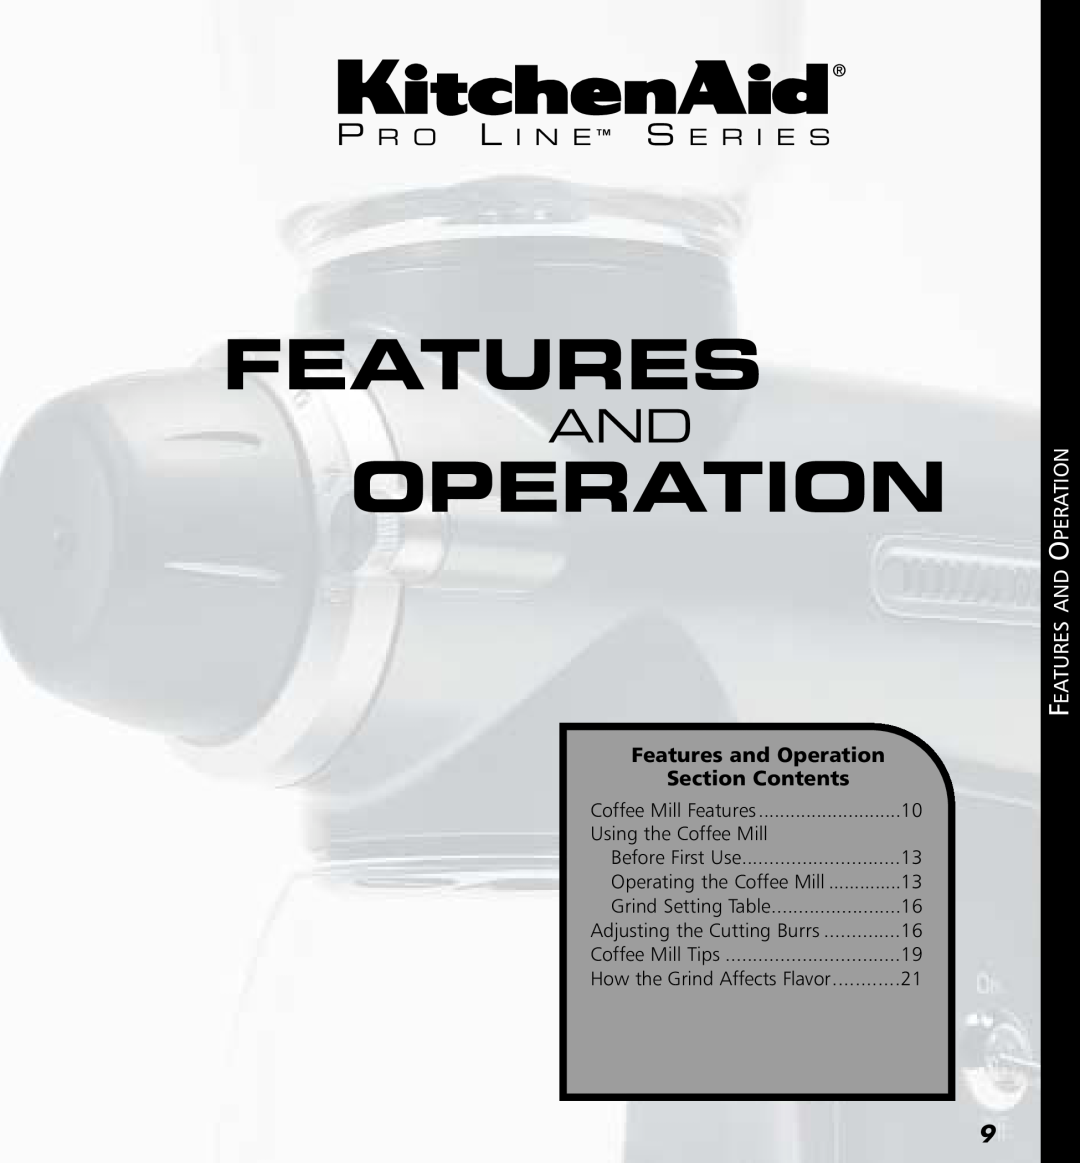 KitchenAid KPCG100 manual P R O L I N E S E R I E S, Features and Operation Section Contents, Using the Coffee Mill 